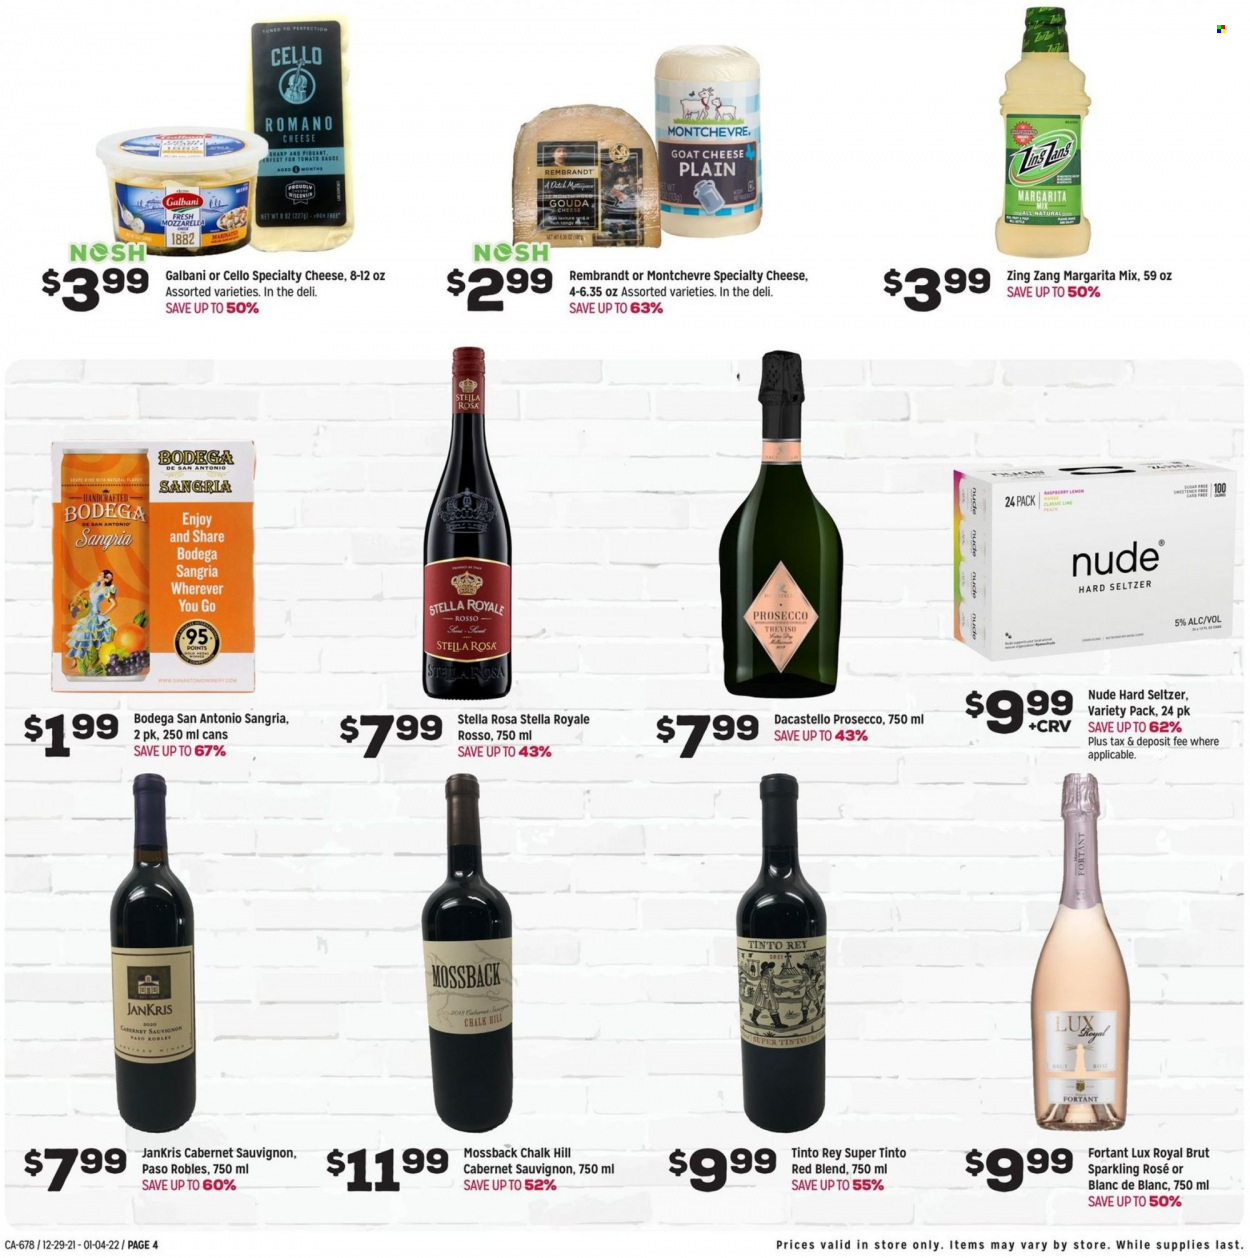 thumbnail - Grocery Outlet Flyer - 12/29/2021 - 01/04/2022 - Sales products - sauce, goat cheese, gouda, mozzarella, cheese, Galbani, Montchevre, sweetener, Margarita Mix, Cabernet Sauvignon, prosecco, rosé wine, Hard Seltzer, Lux, Brut. Page 4.